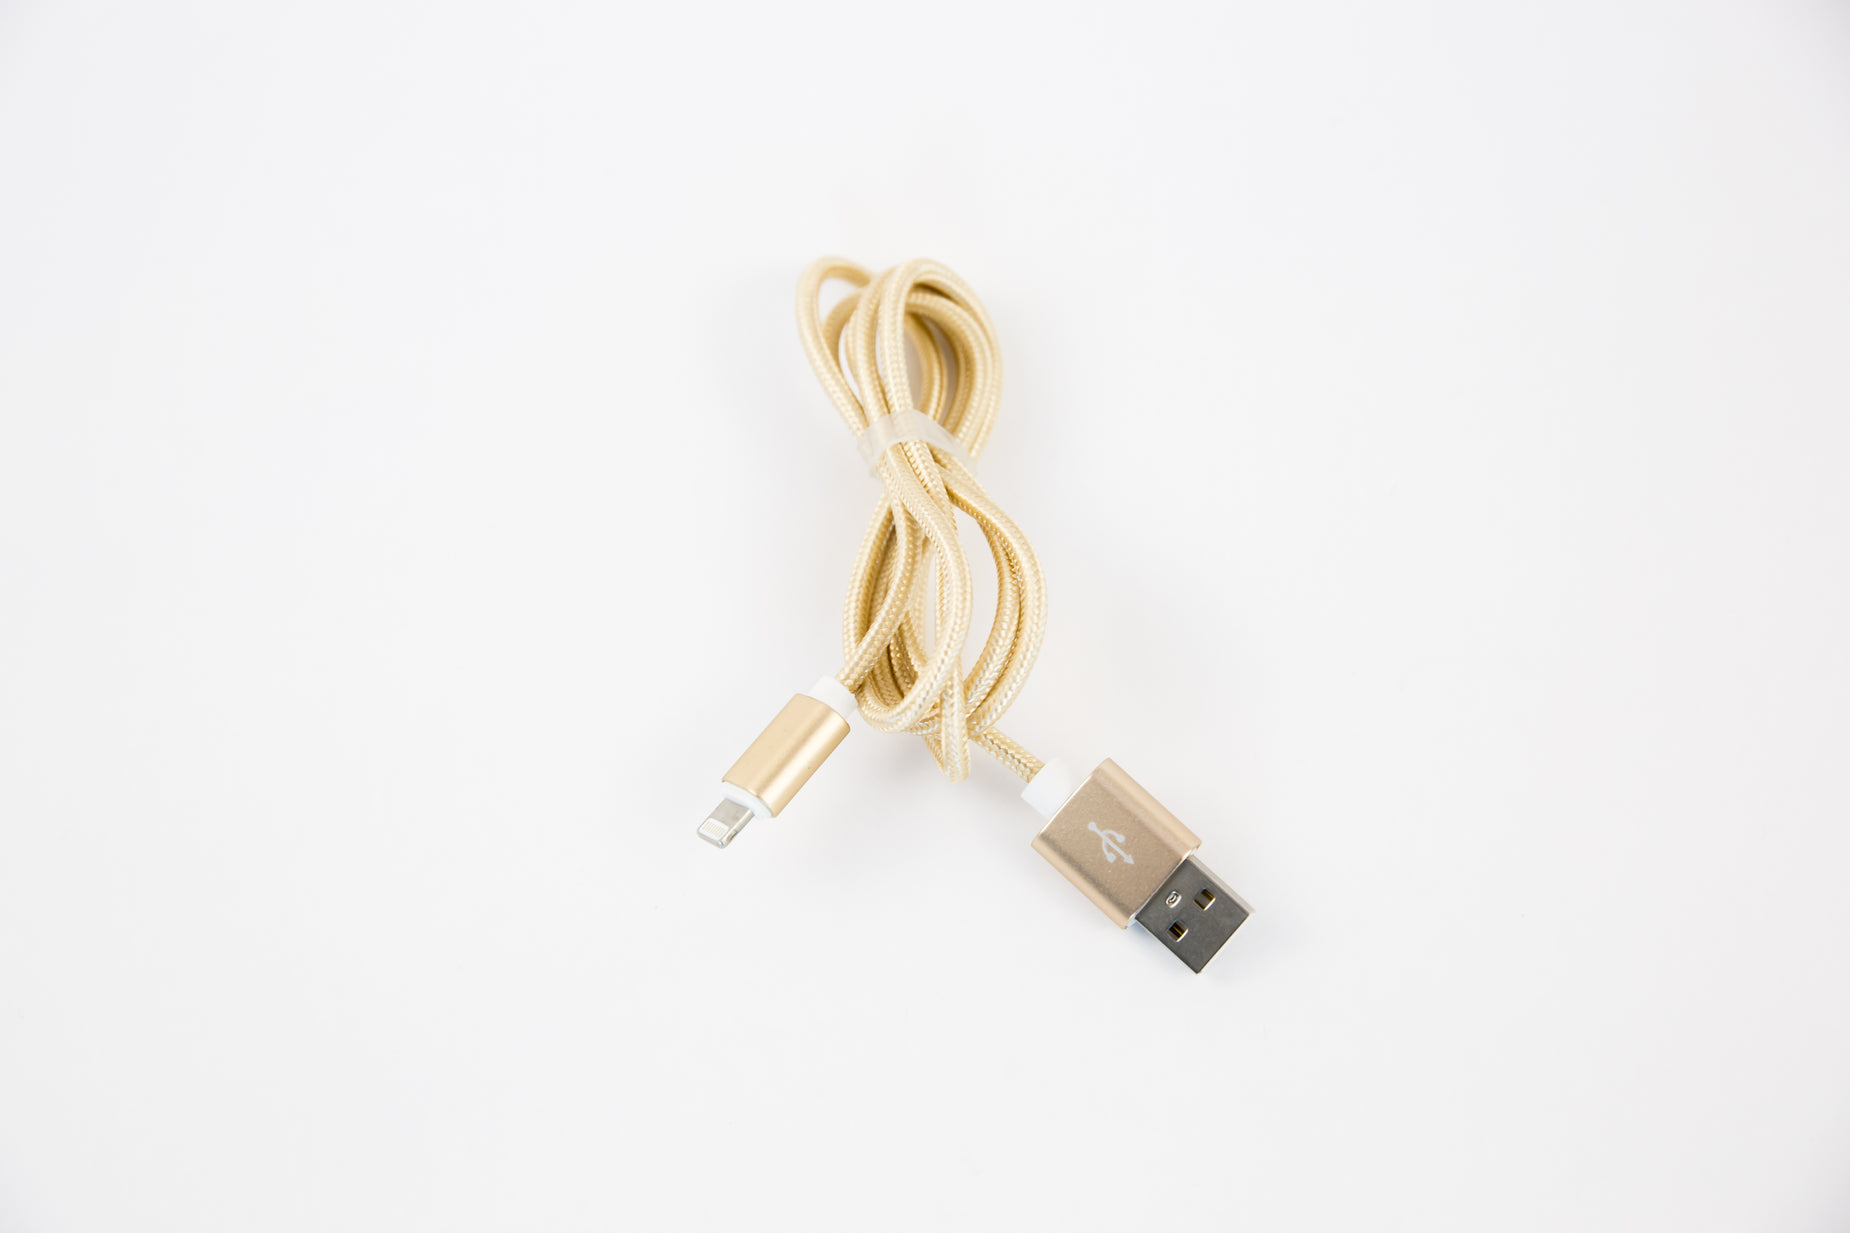 there is a gold colored cord with a usb port attached